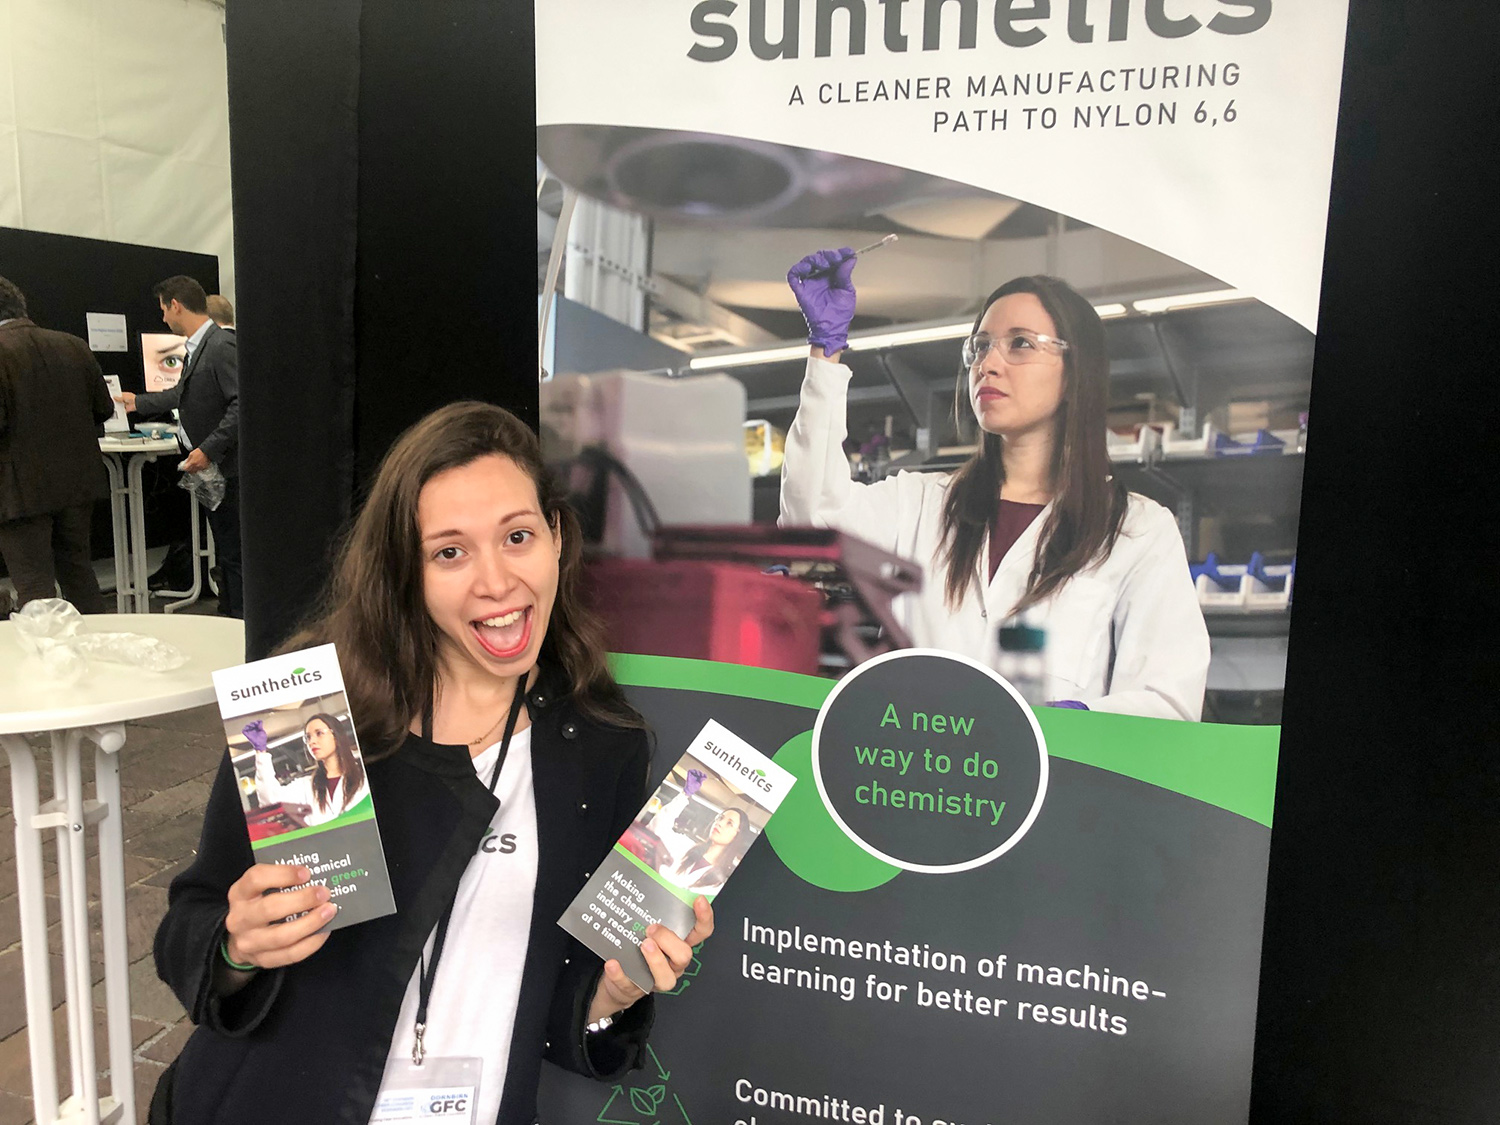 Daniela Blanco excitedly holds up company brochures while a promotional banner shows Daniela in the lab and reads: “A cleaner manufacturing path to Nylon 6,6”, “A new way to do chemistry”, and “Implementation of machine-learning for better results.”